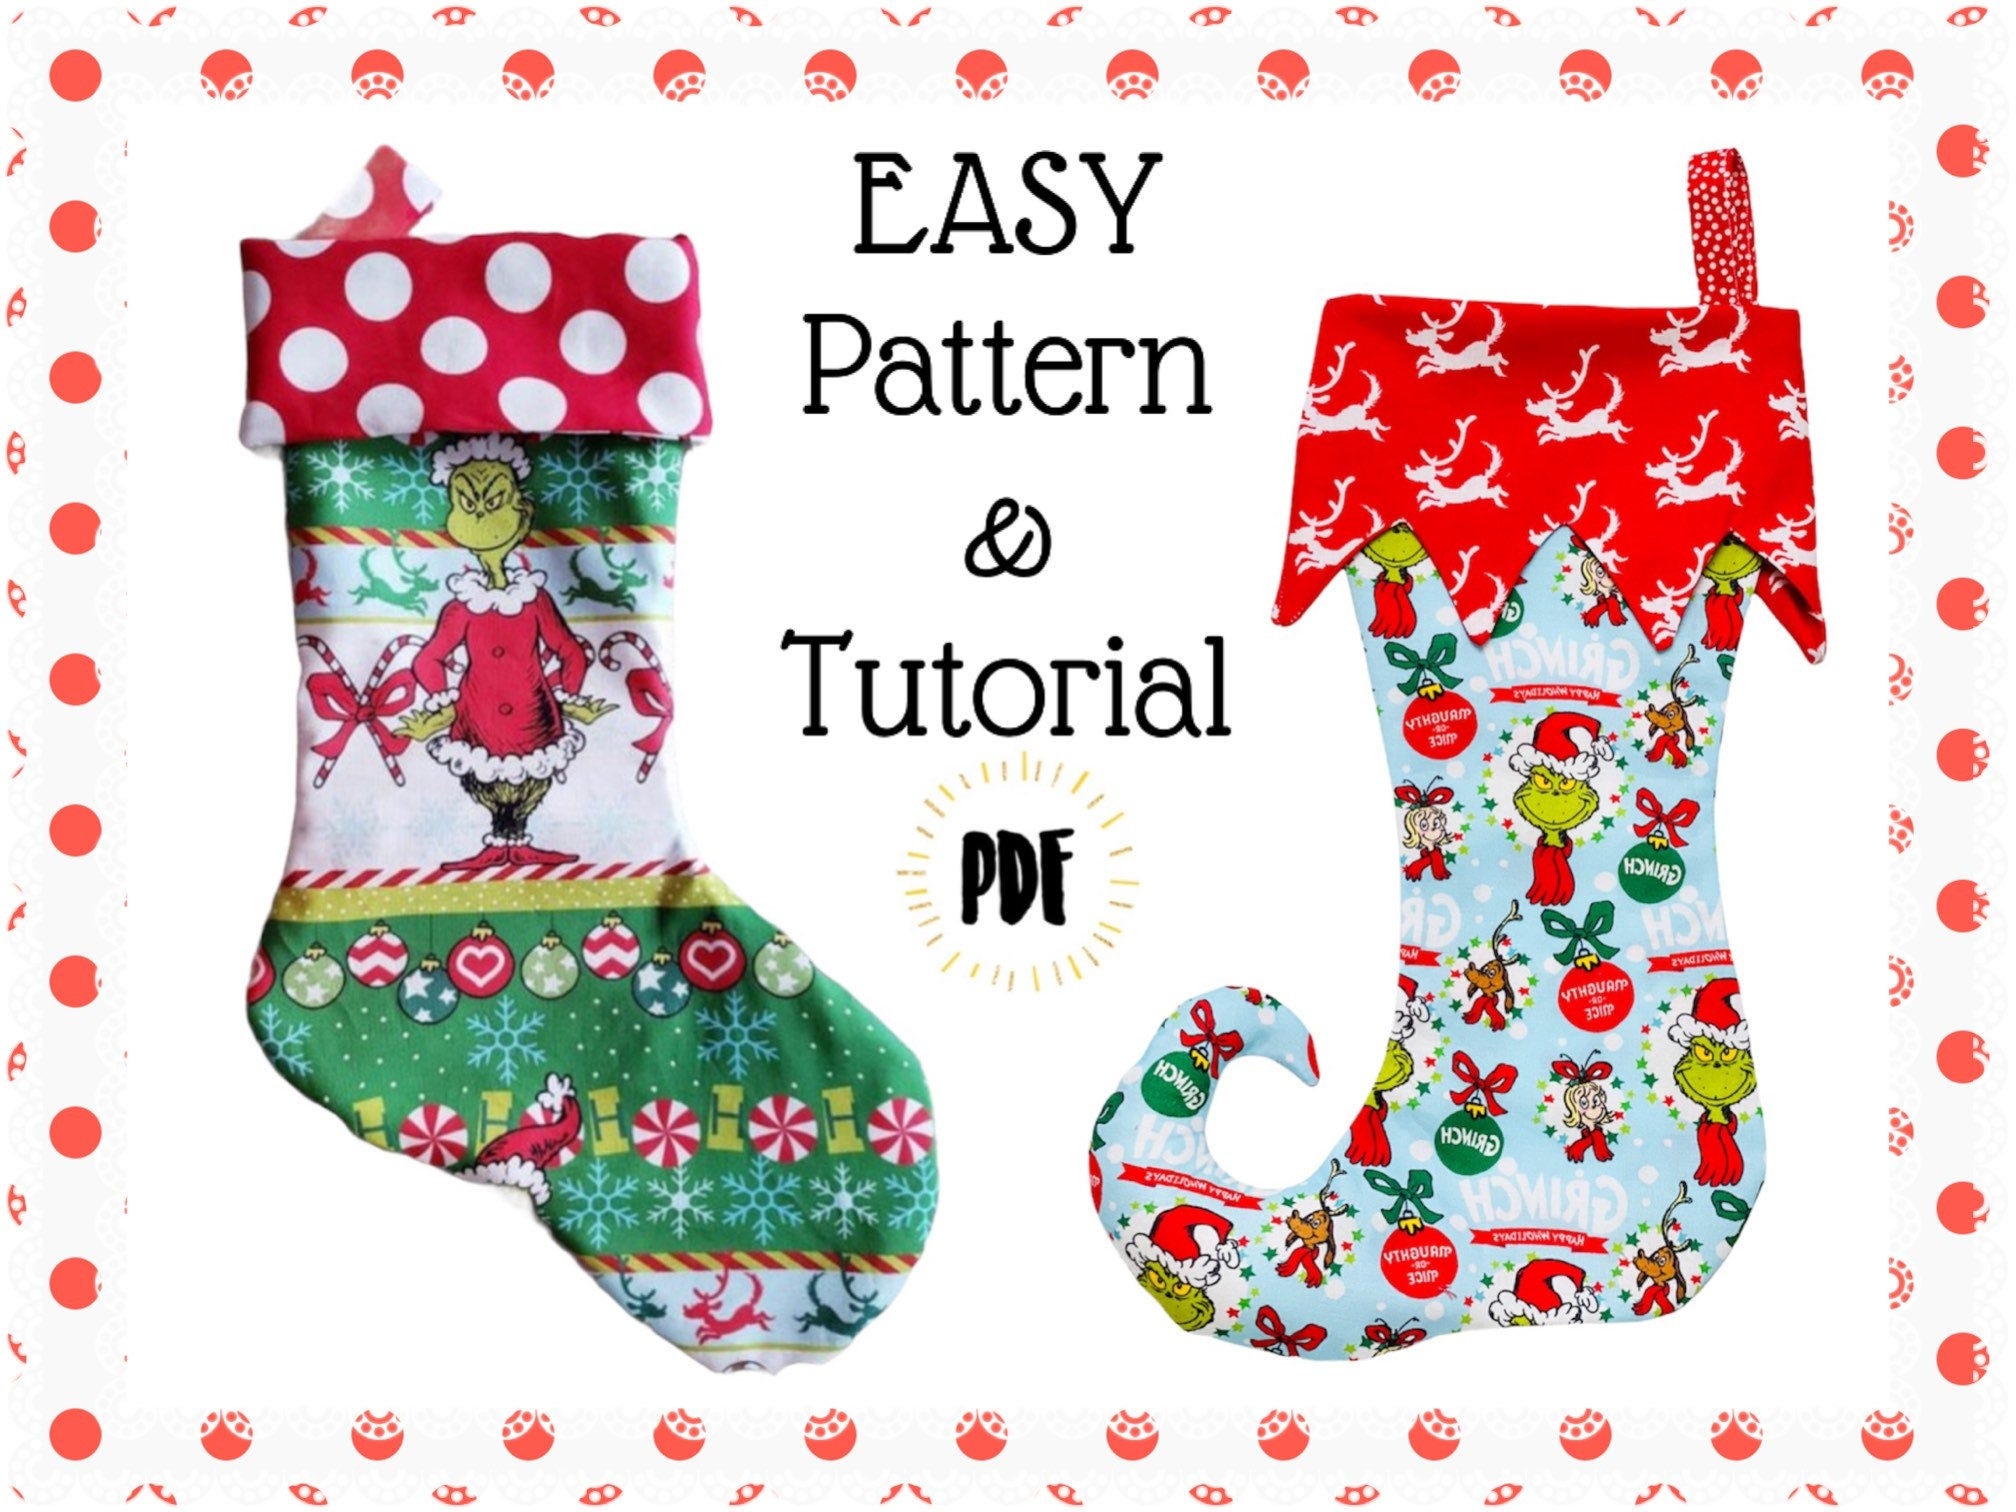 Learn to Sew an EASY Christmas Stocking PDF | Beginners | Elf | Decor | DIY | Pattern | How to | Tutorial | Instructions | Quick | Holiday